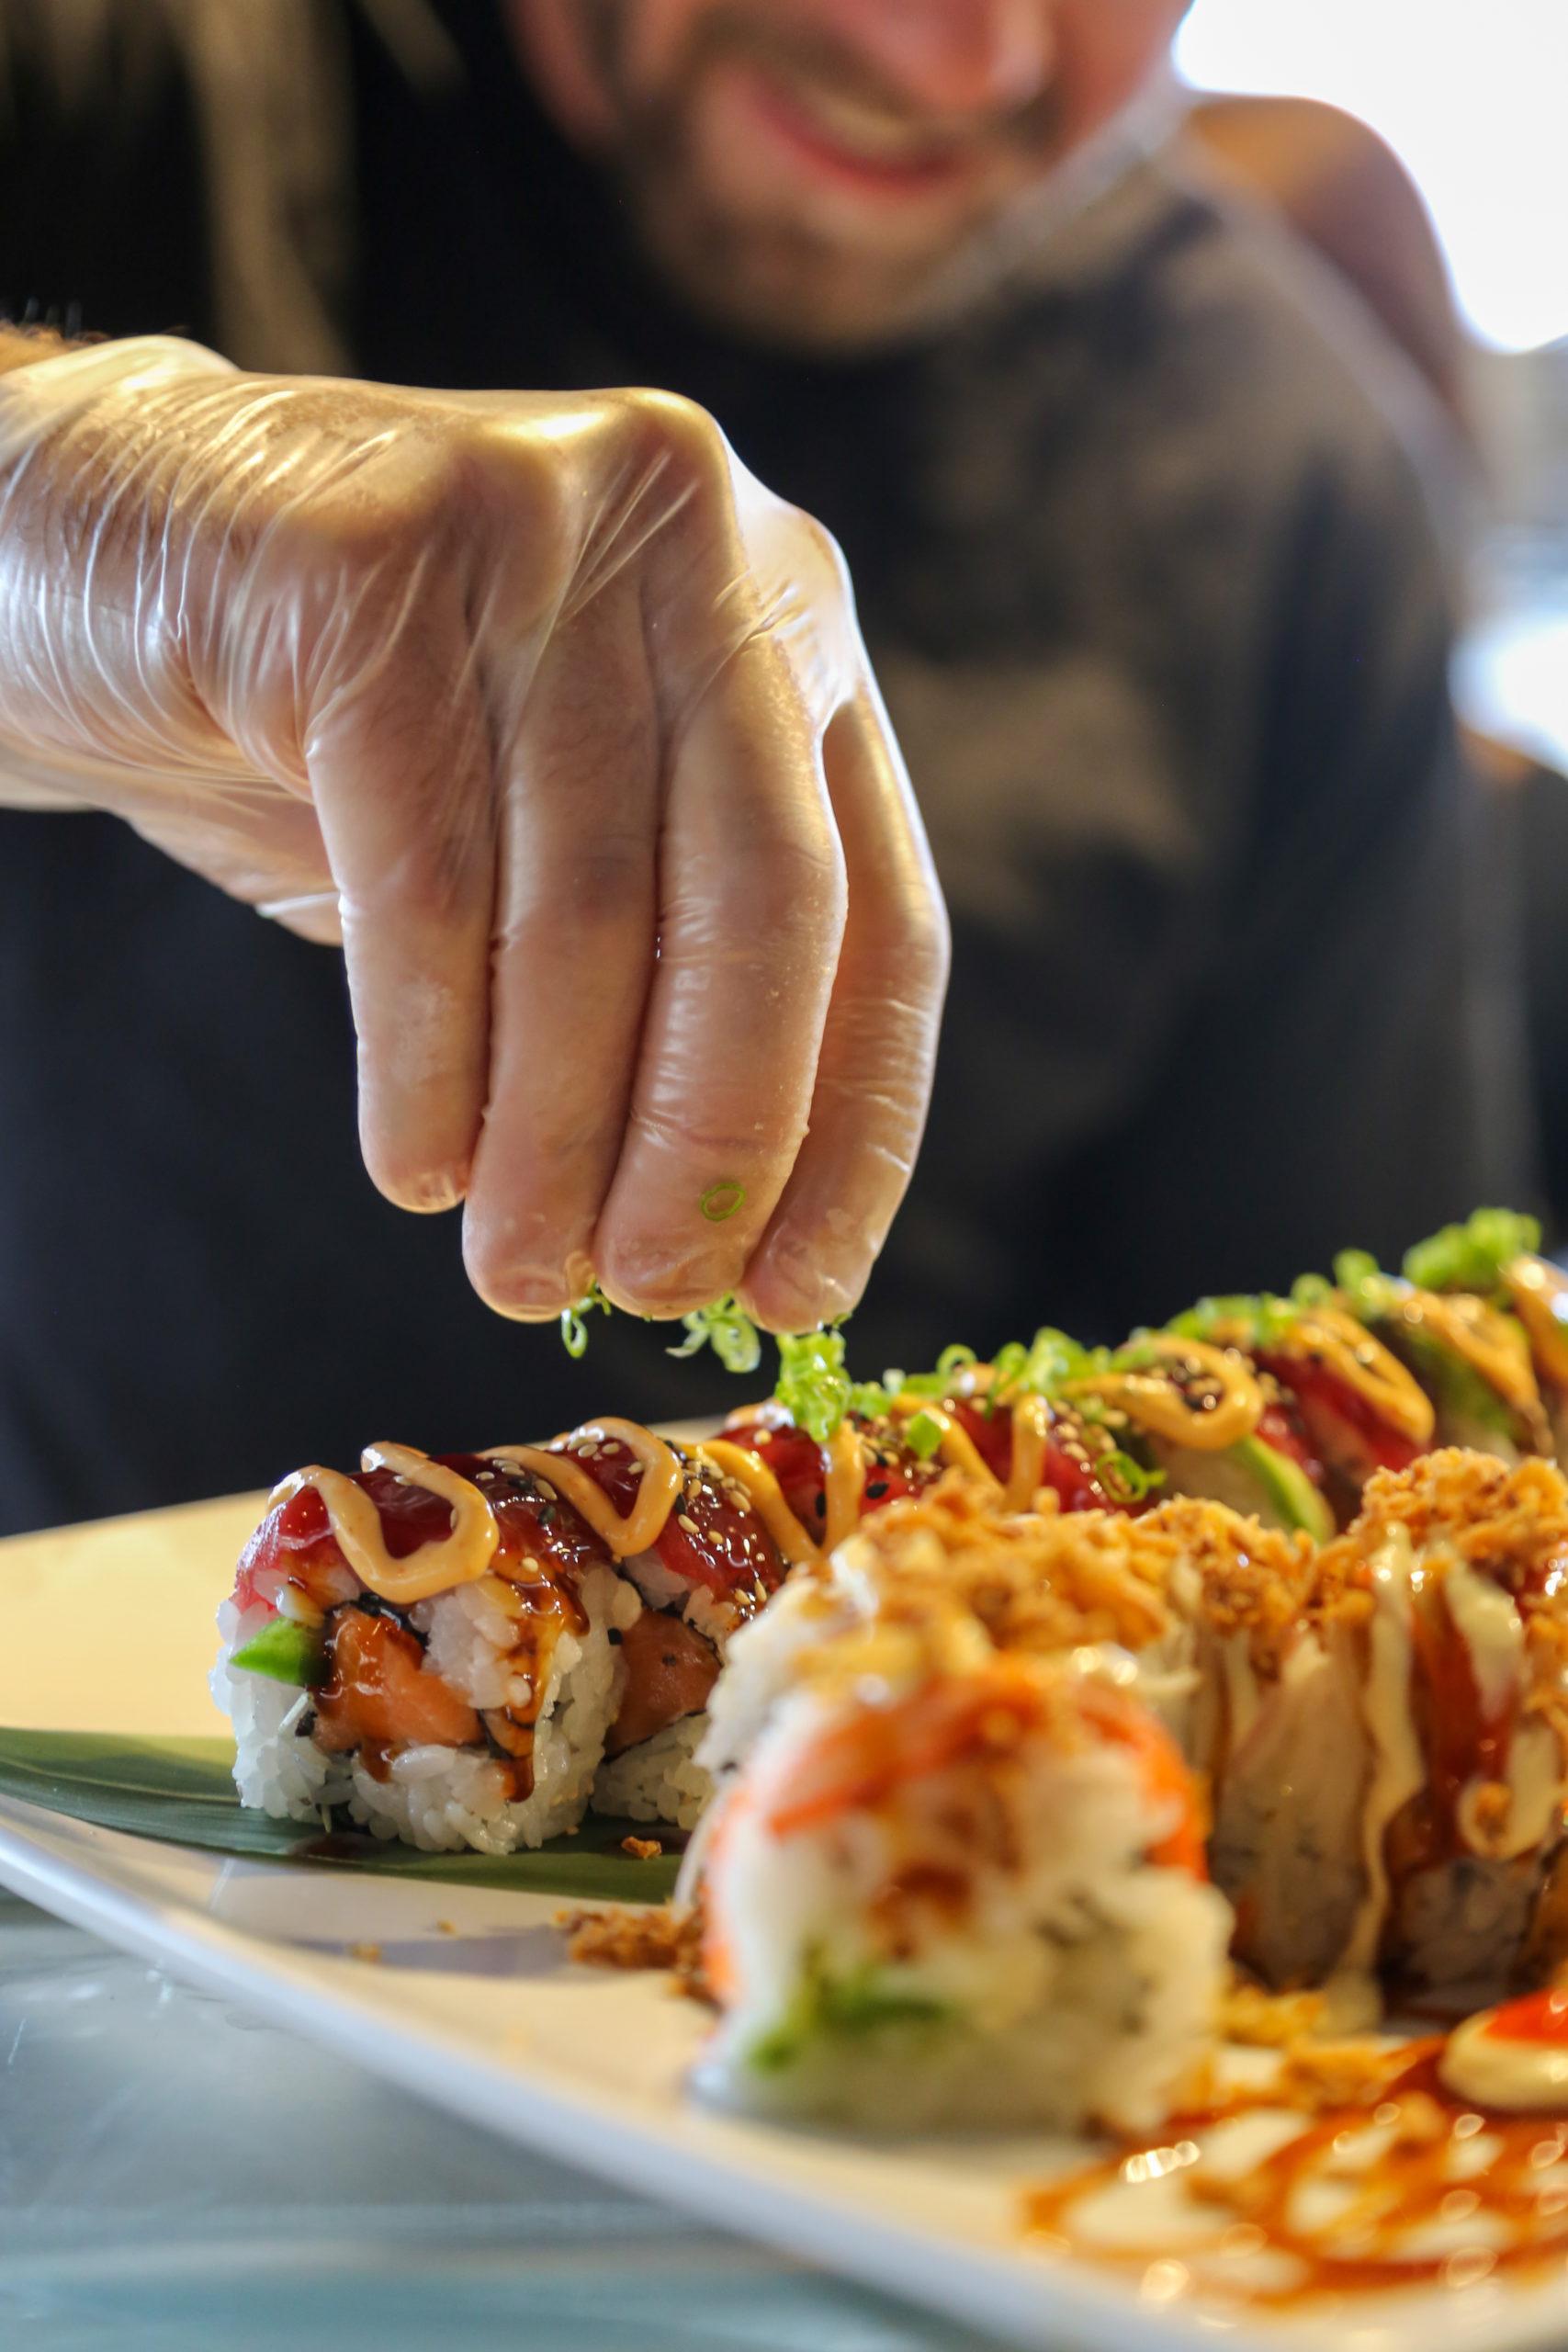 Top+5+sushi+rolls+to+brighten+your+mood